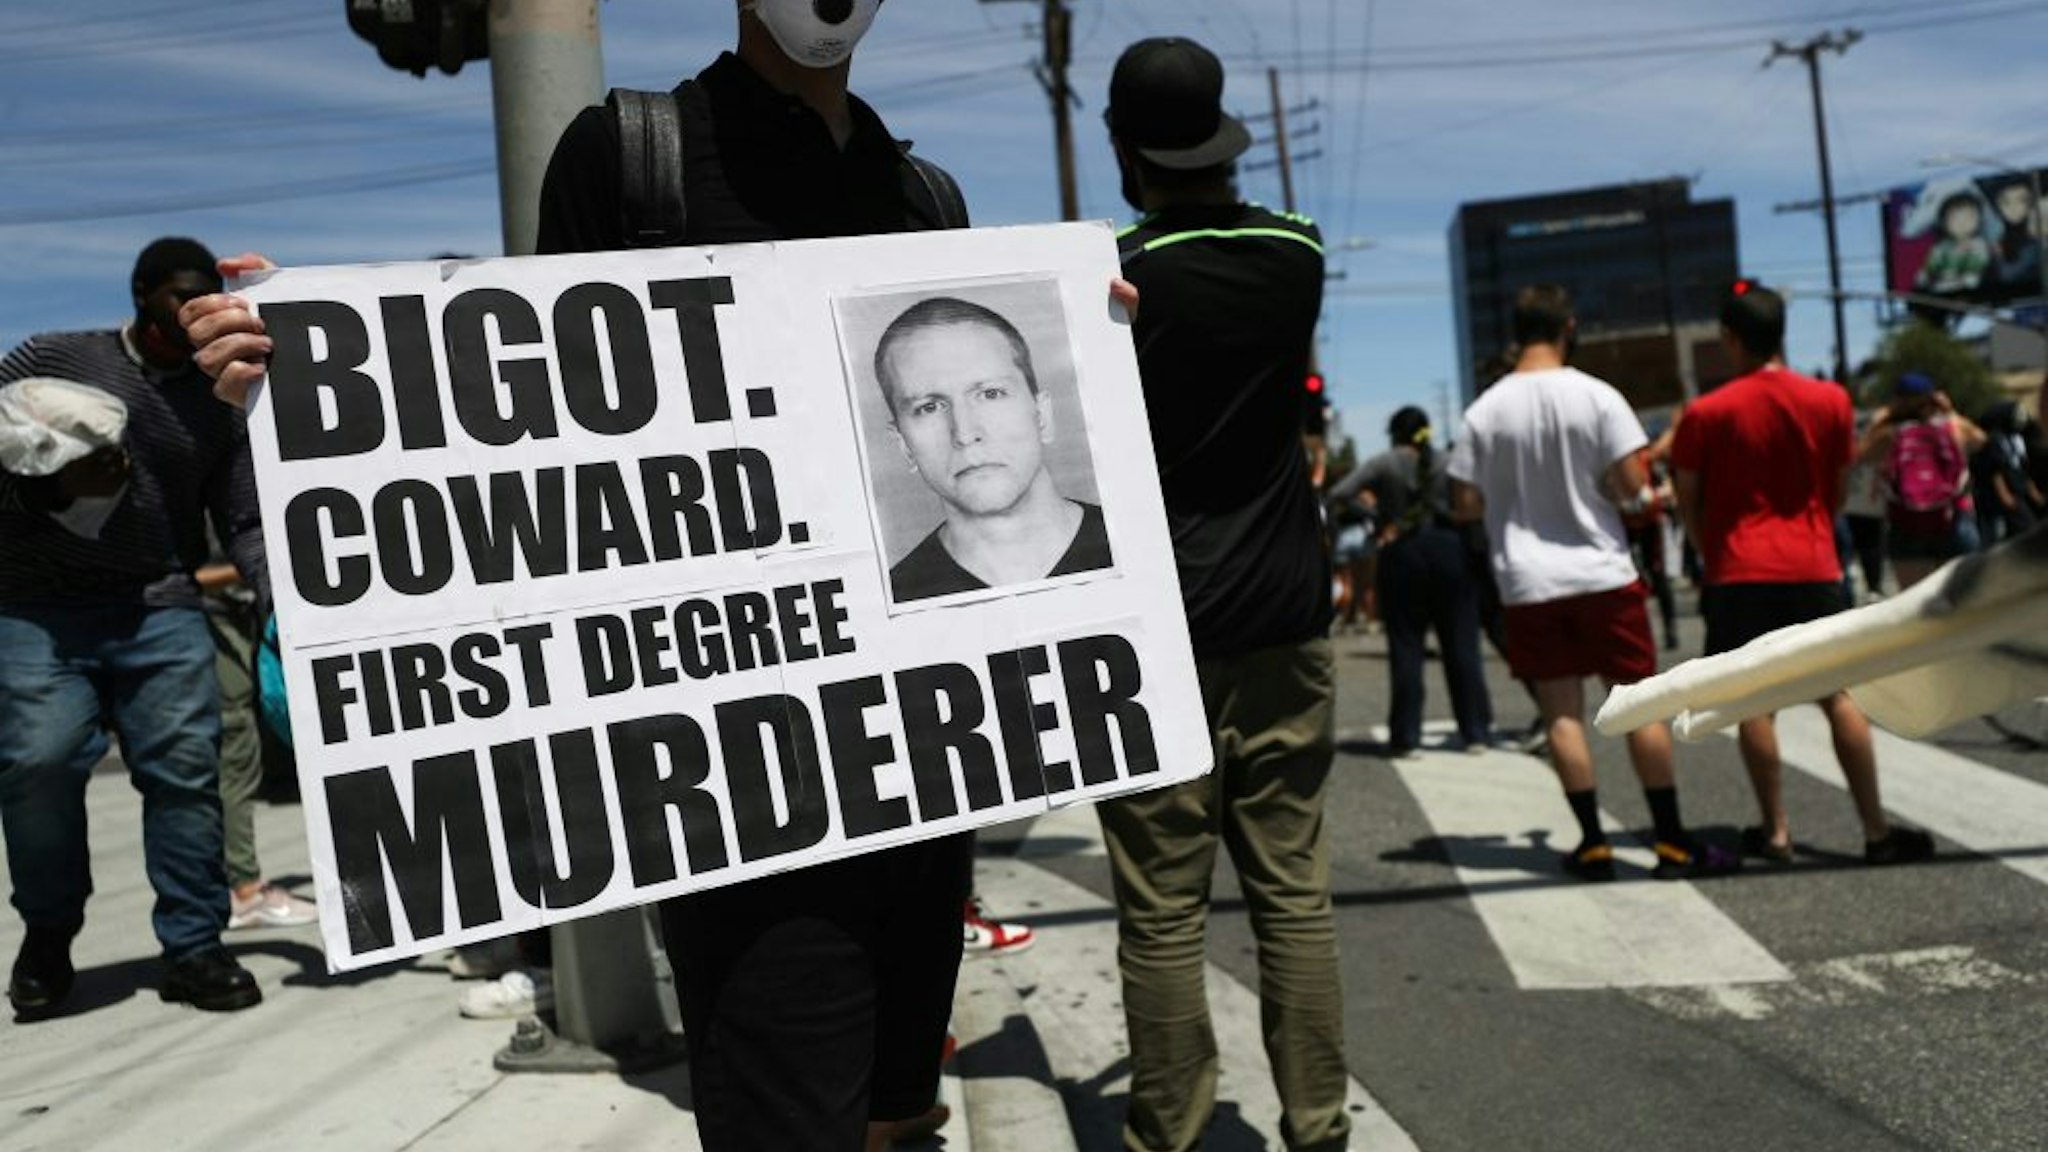 LOS ANGELES, CALIFORNIA - MAY 30: A protester holds a sign with a photo of former Minneapolis police officer Derek Chauvin during demonstrations following the death of George Floyd on May 30, 2020 in Los Angeles, California. Chauvin was taken into custody for Floyd's death. Chauvin has been accused of kneeling on Floyd's neck as he pleaded with him about not being able to breathe. Floyd was pronounced dead a short while later. Chauvin and 3 other officers, who were involved in the arrest, were fired from the police department after a video of the arrest was circulated.